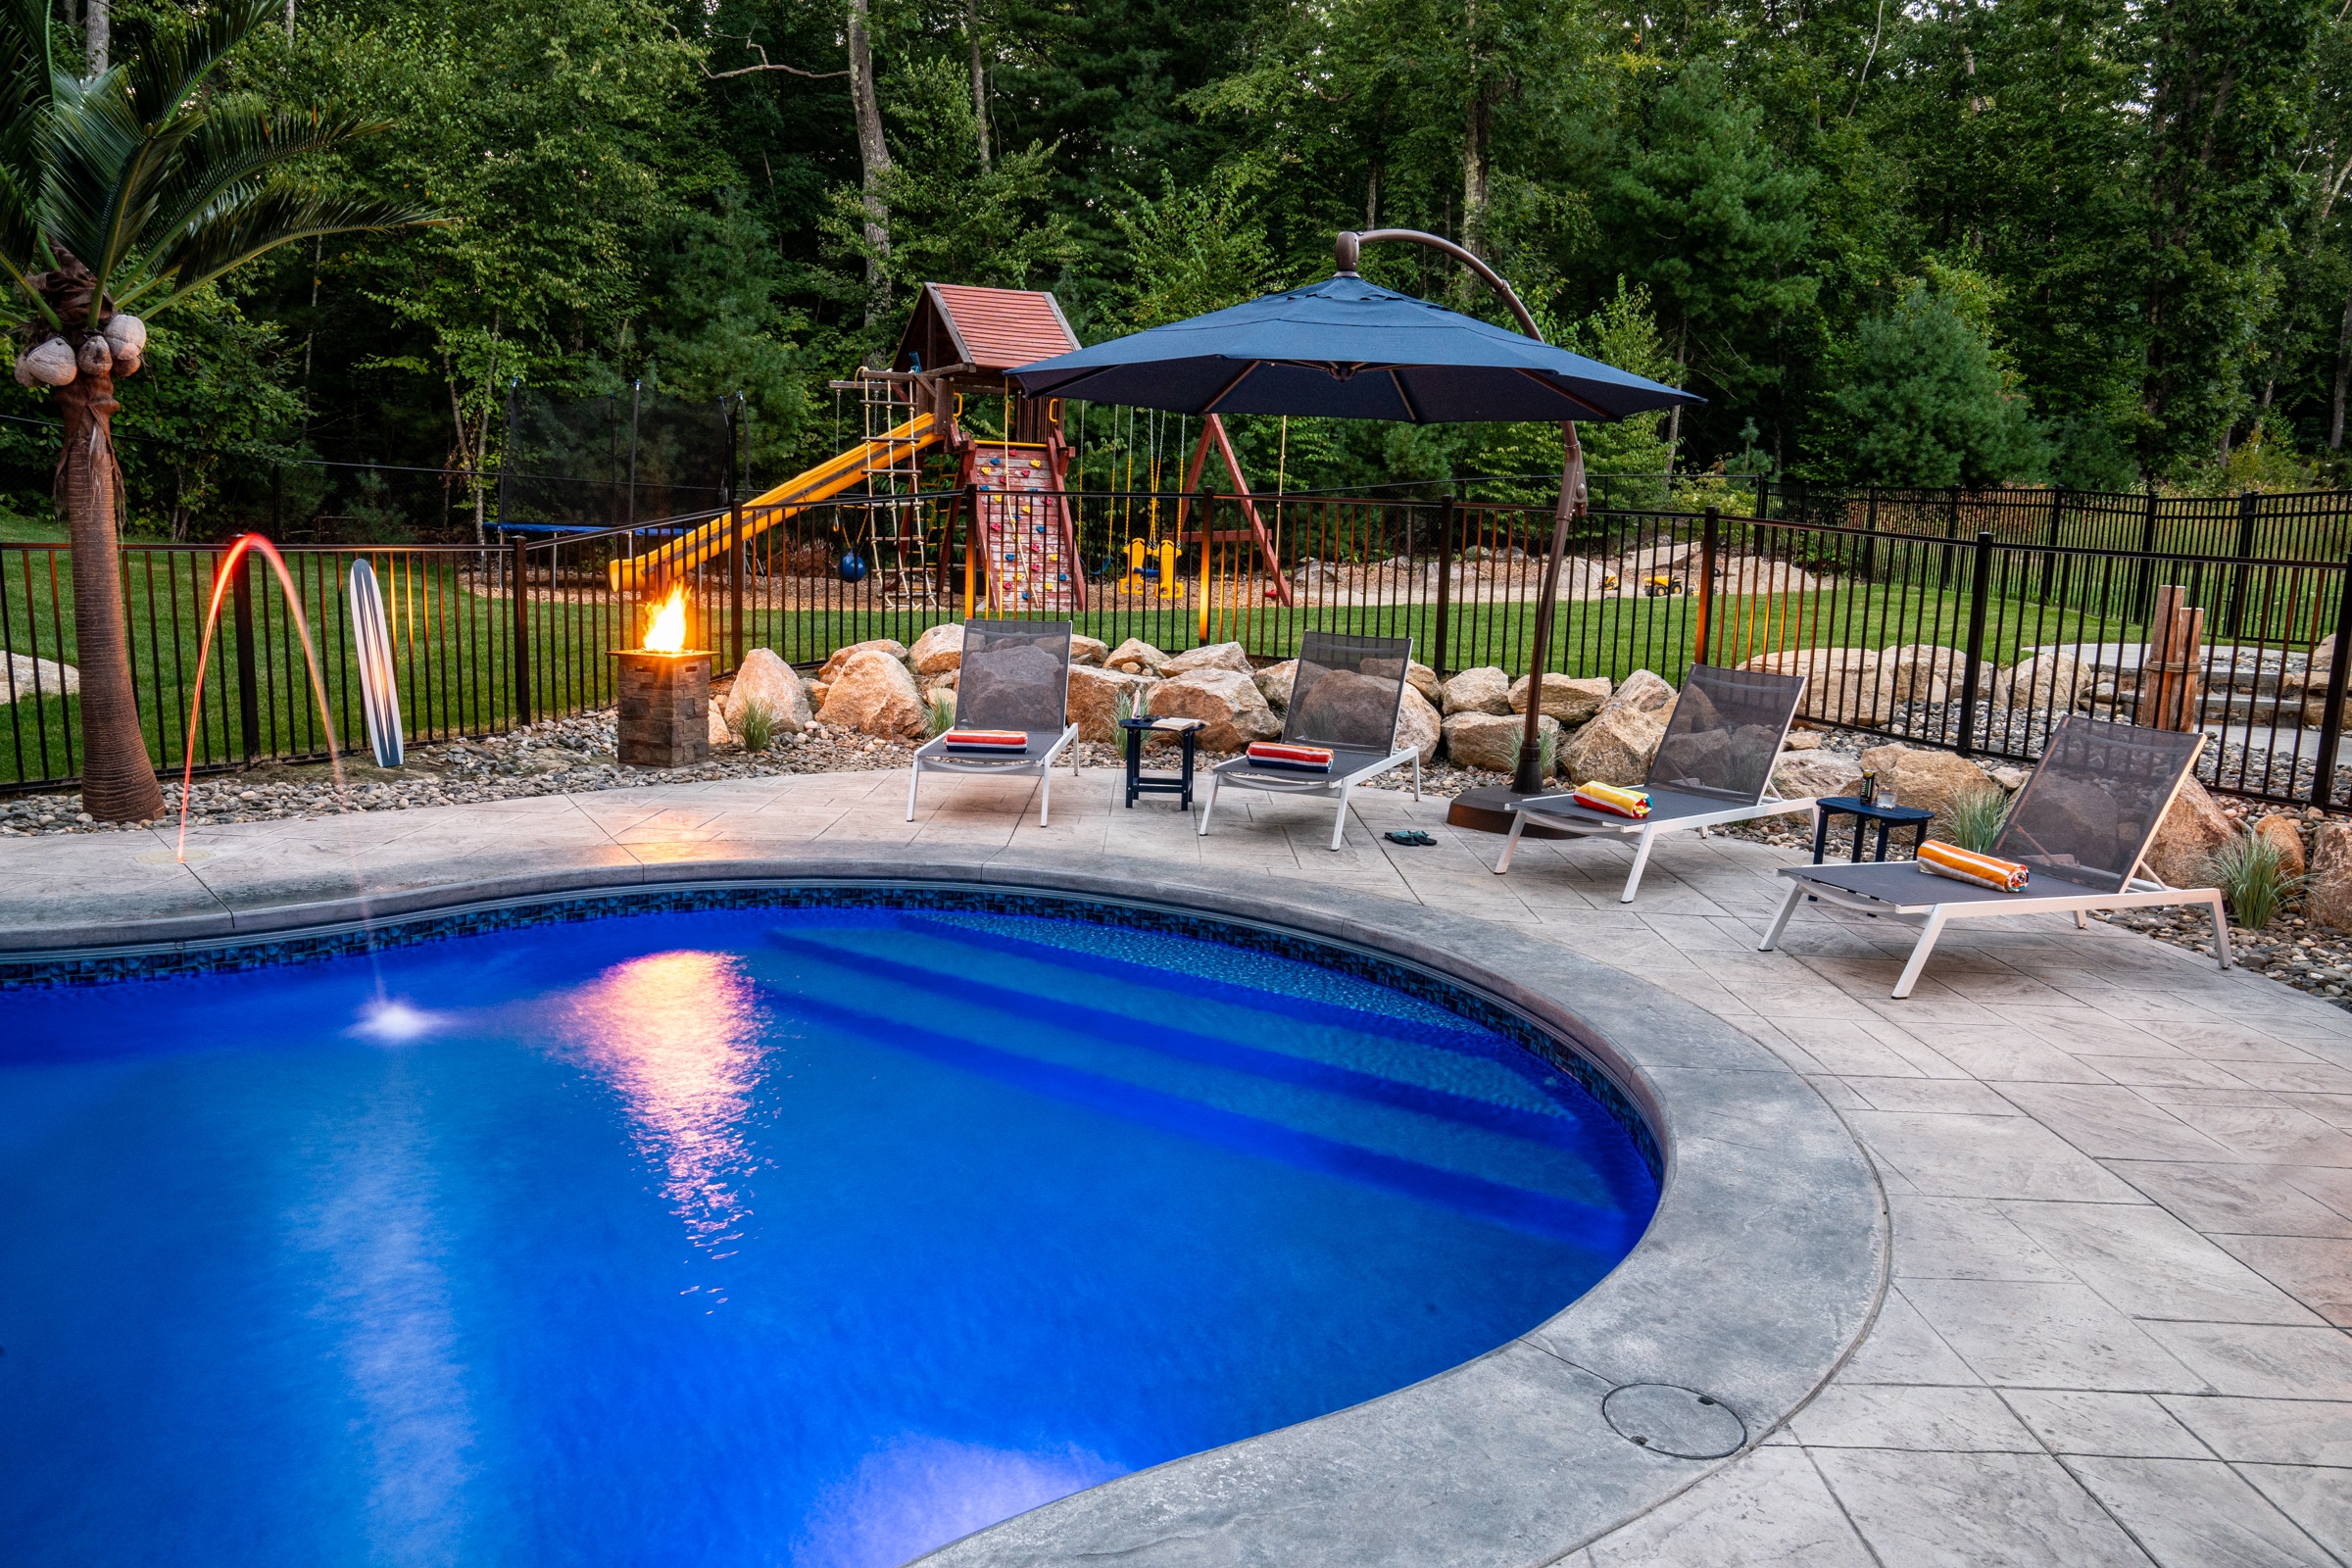 Step into the water from this beautiful stamped concrete pool deck featuring an integrated water jet, built by Dex by Terra.